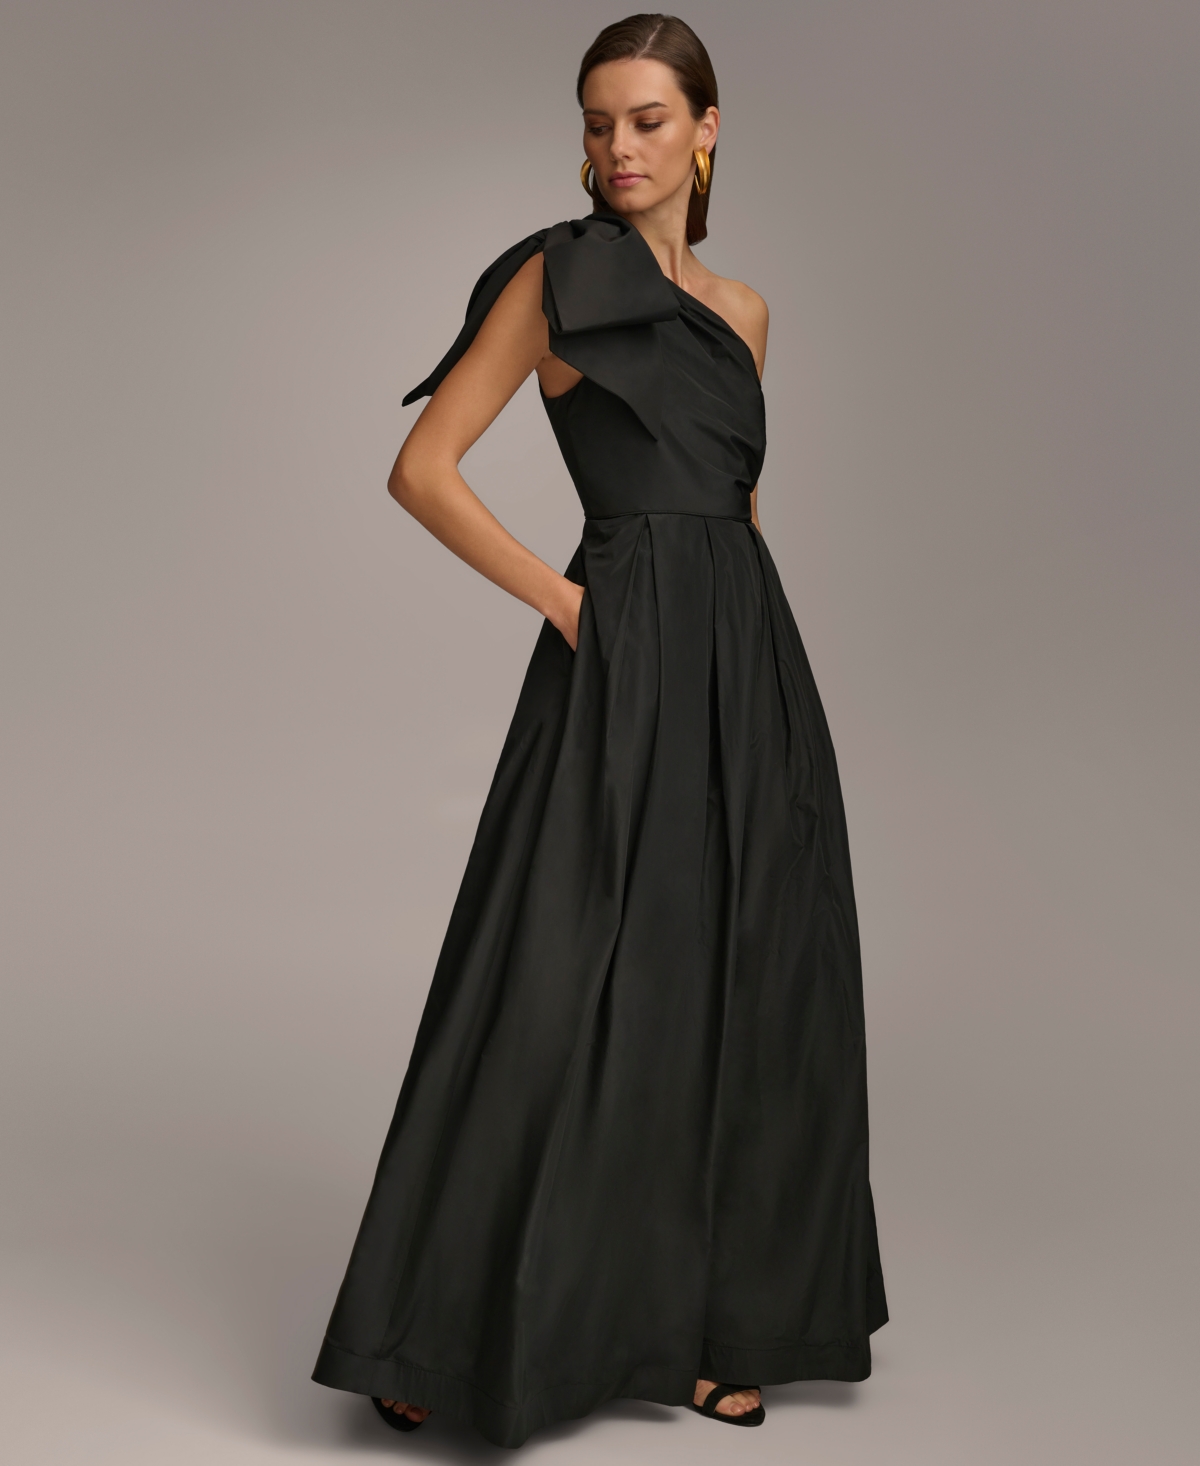 Women's One-Shoulder Bow Gown - Black